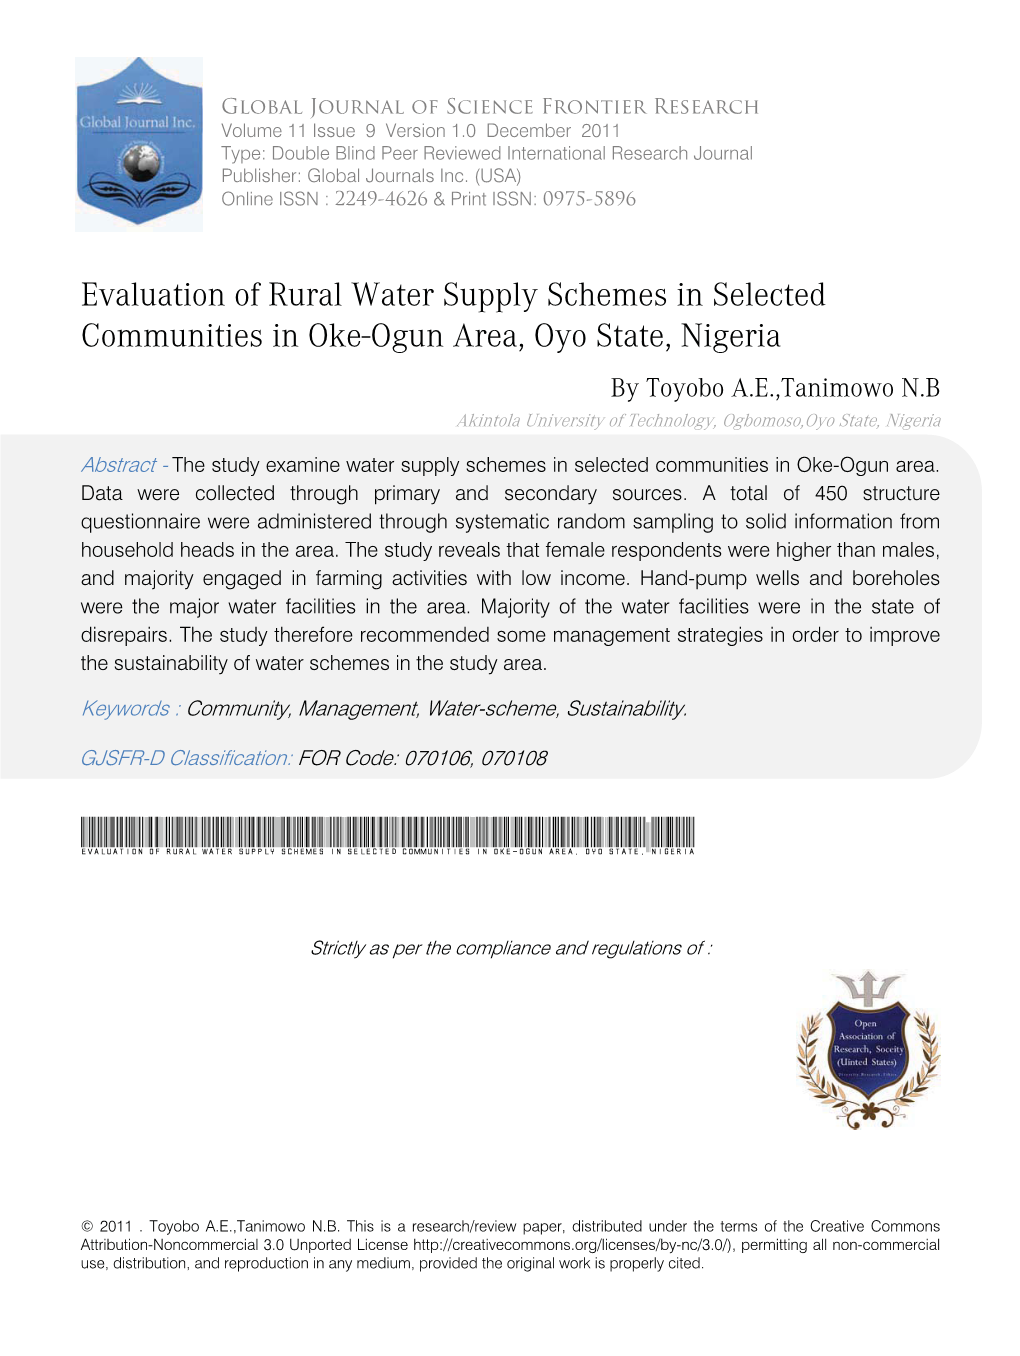 Evaluation of Rural Water Supply Schemes in Selected Communities in Oke-Ogun Area, Oyo State, Nigeria by Toyobo A.E.,Tanimowo N.B